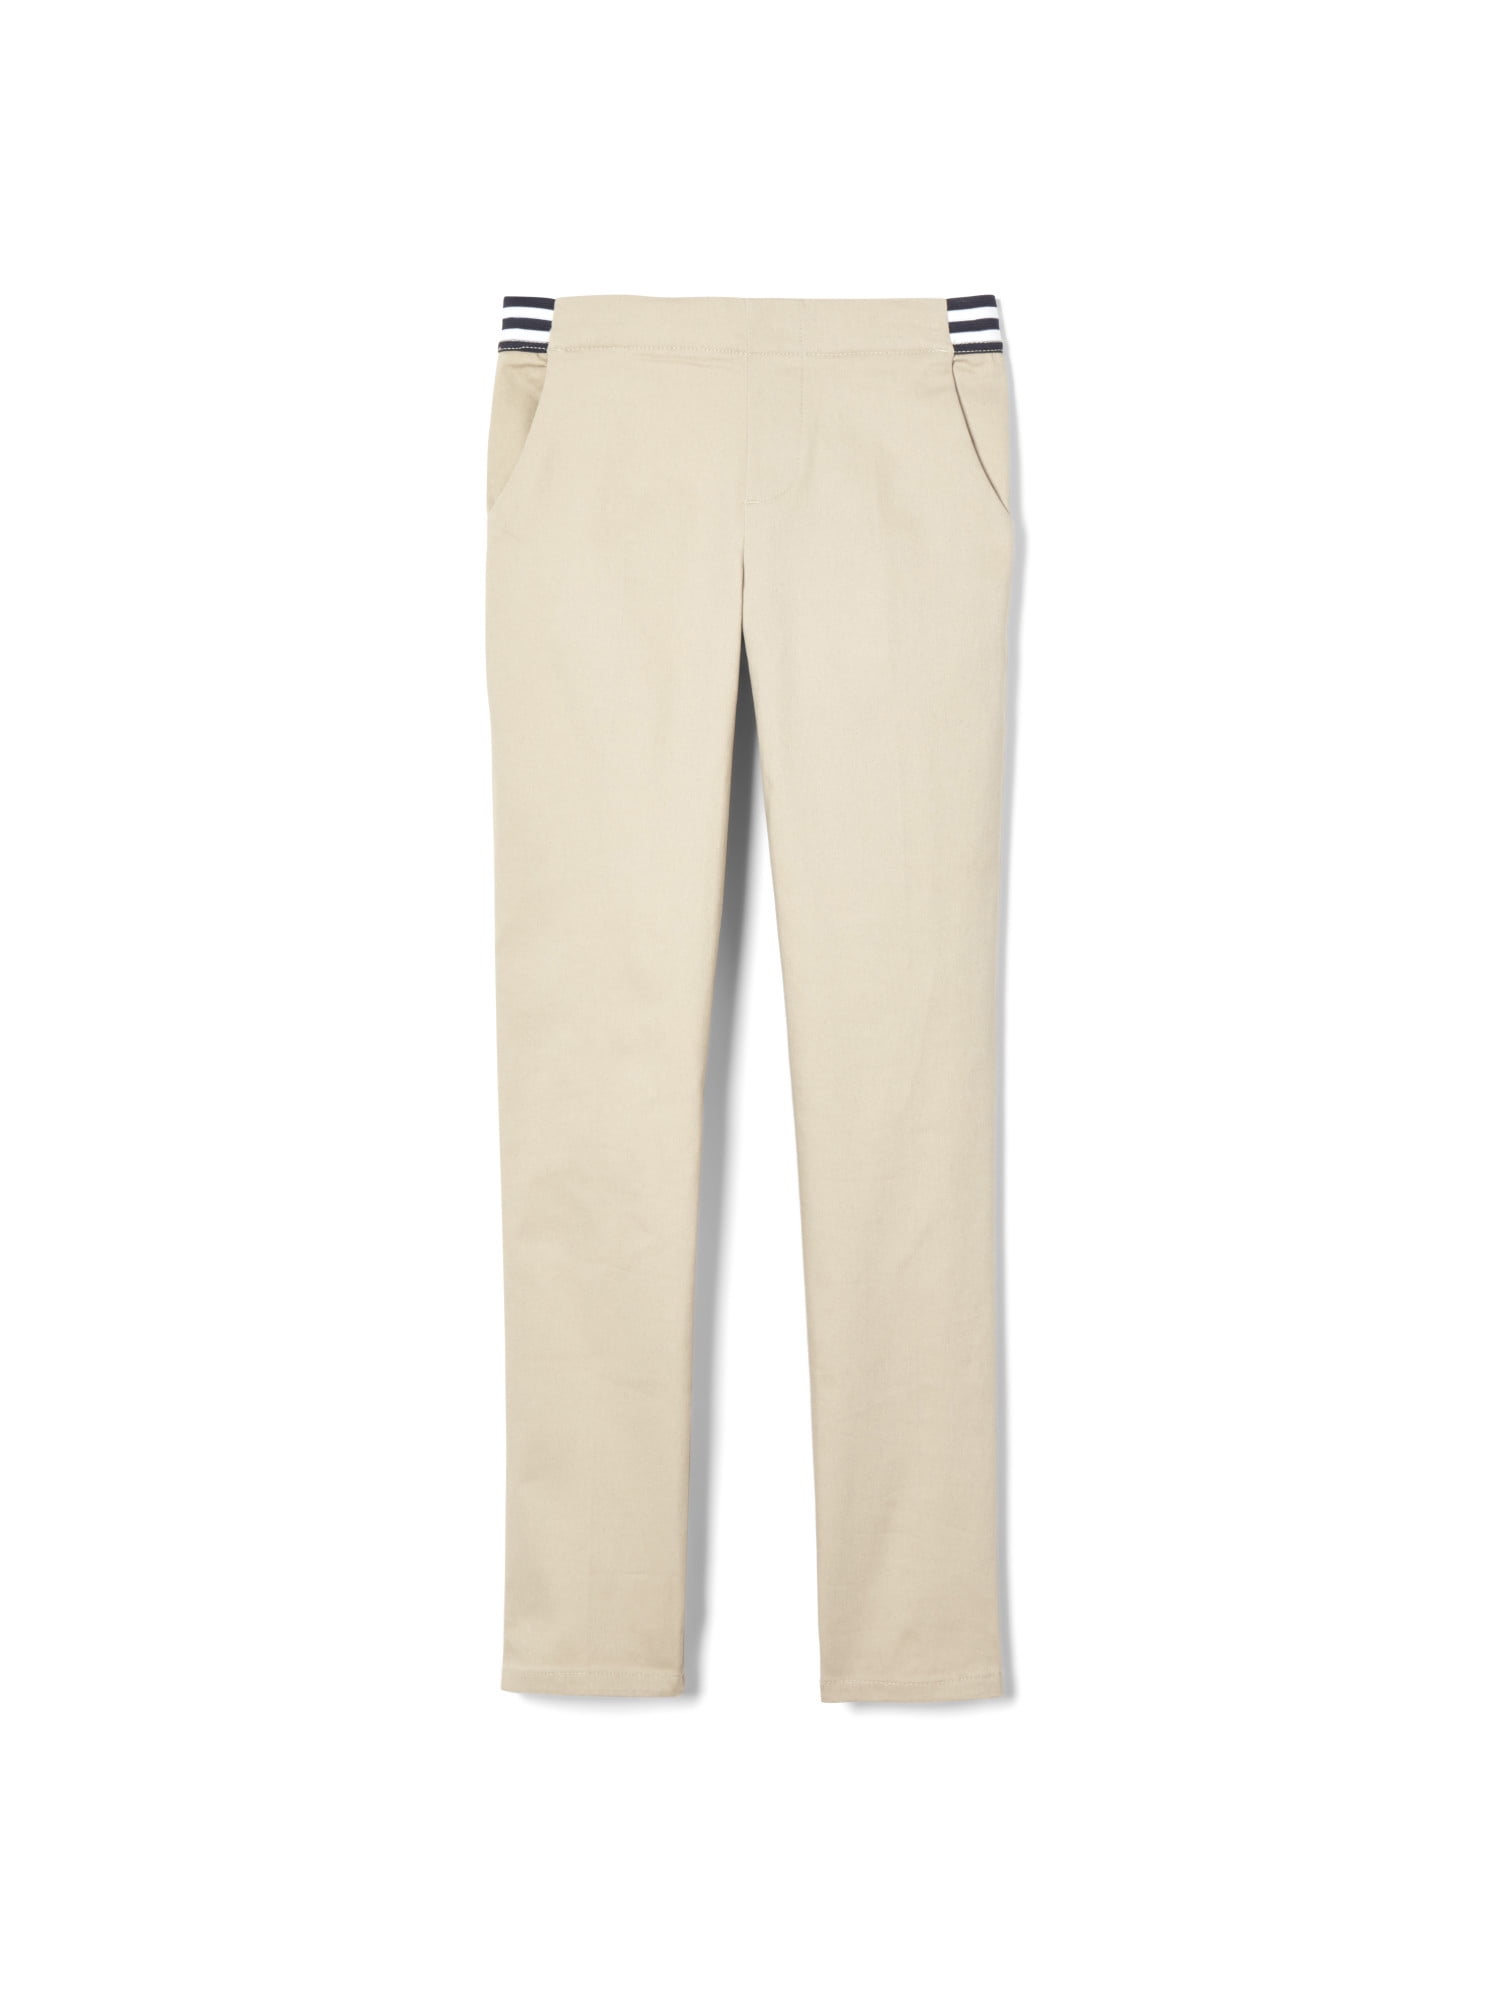 Ankle Length French Toast Girls' Skinny Zip Back Pant 